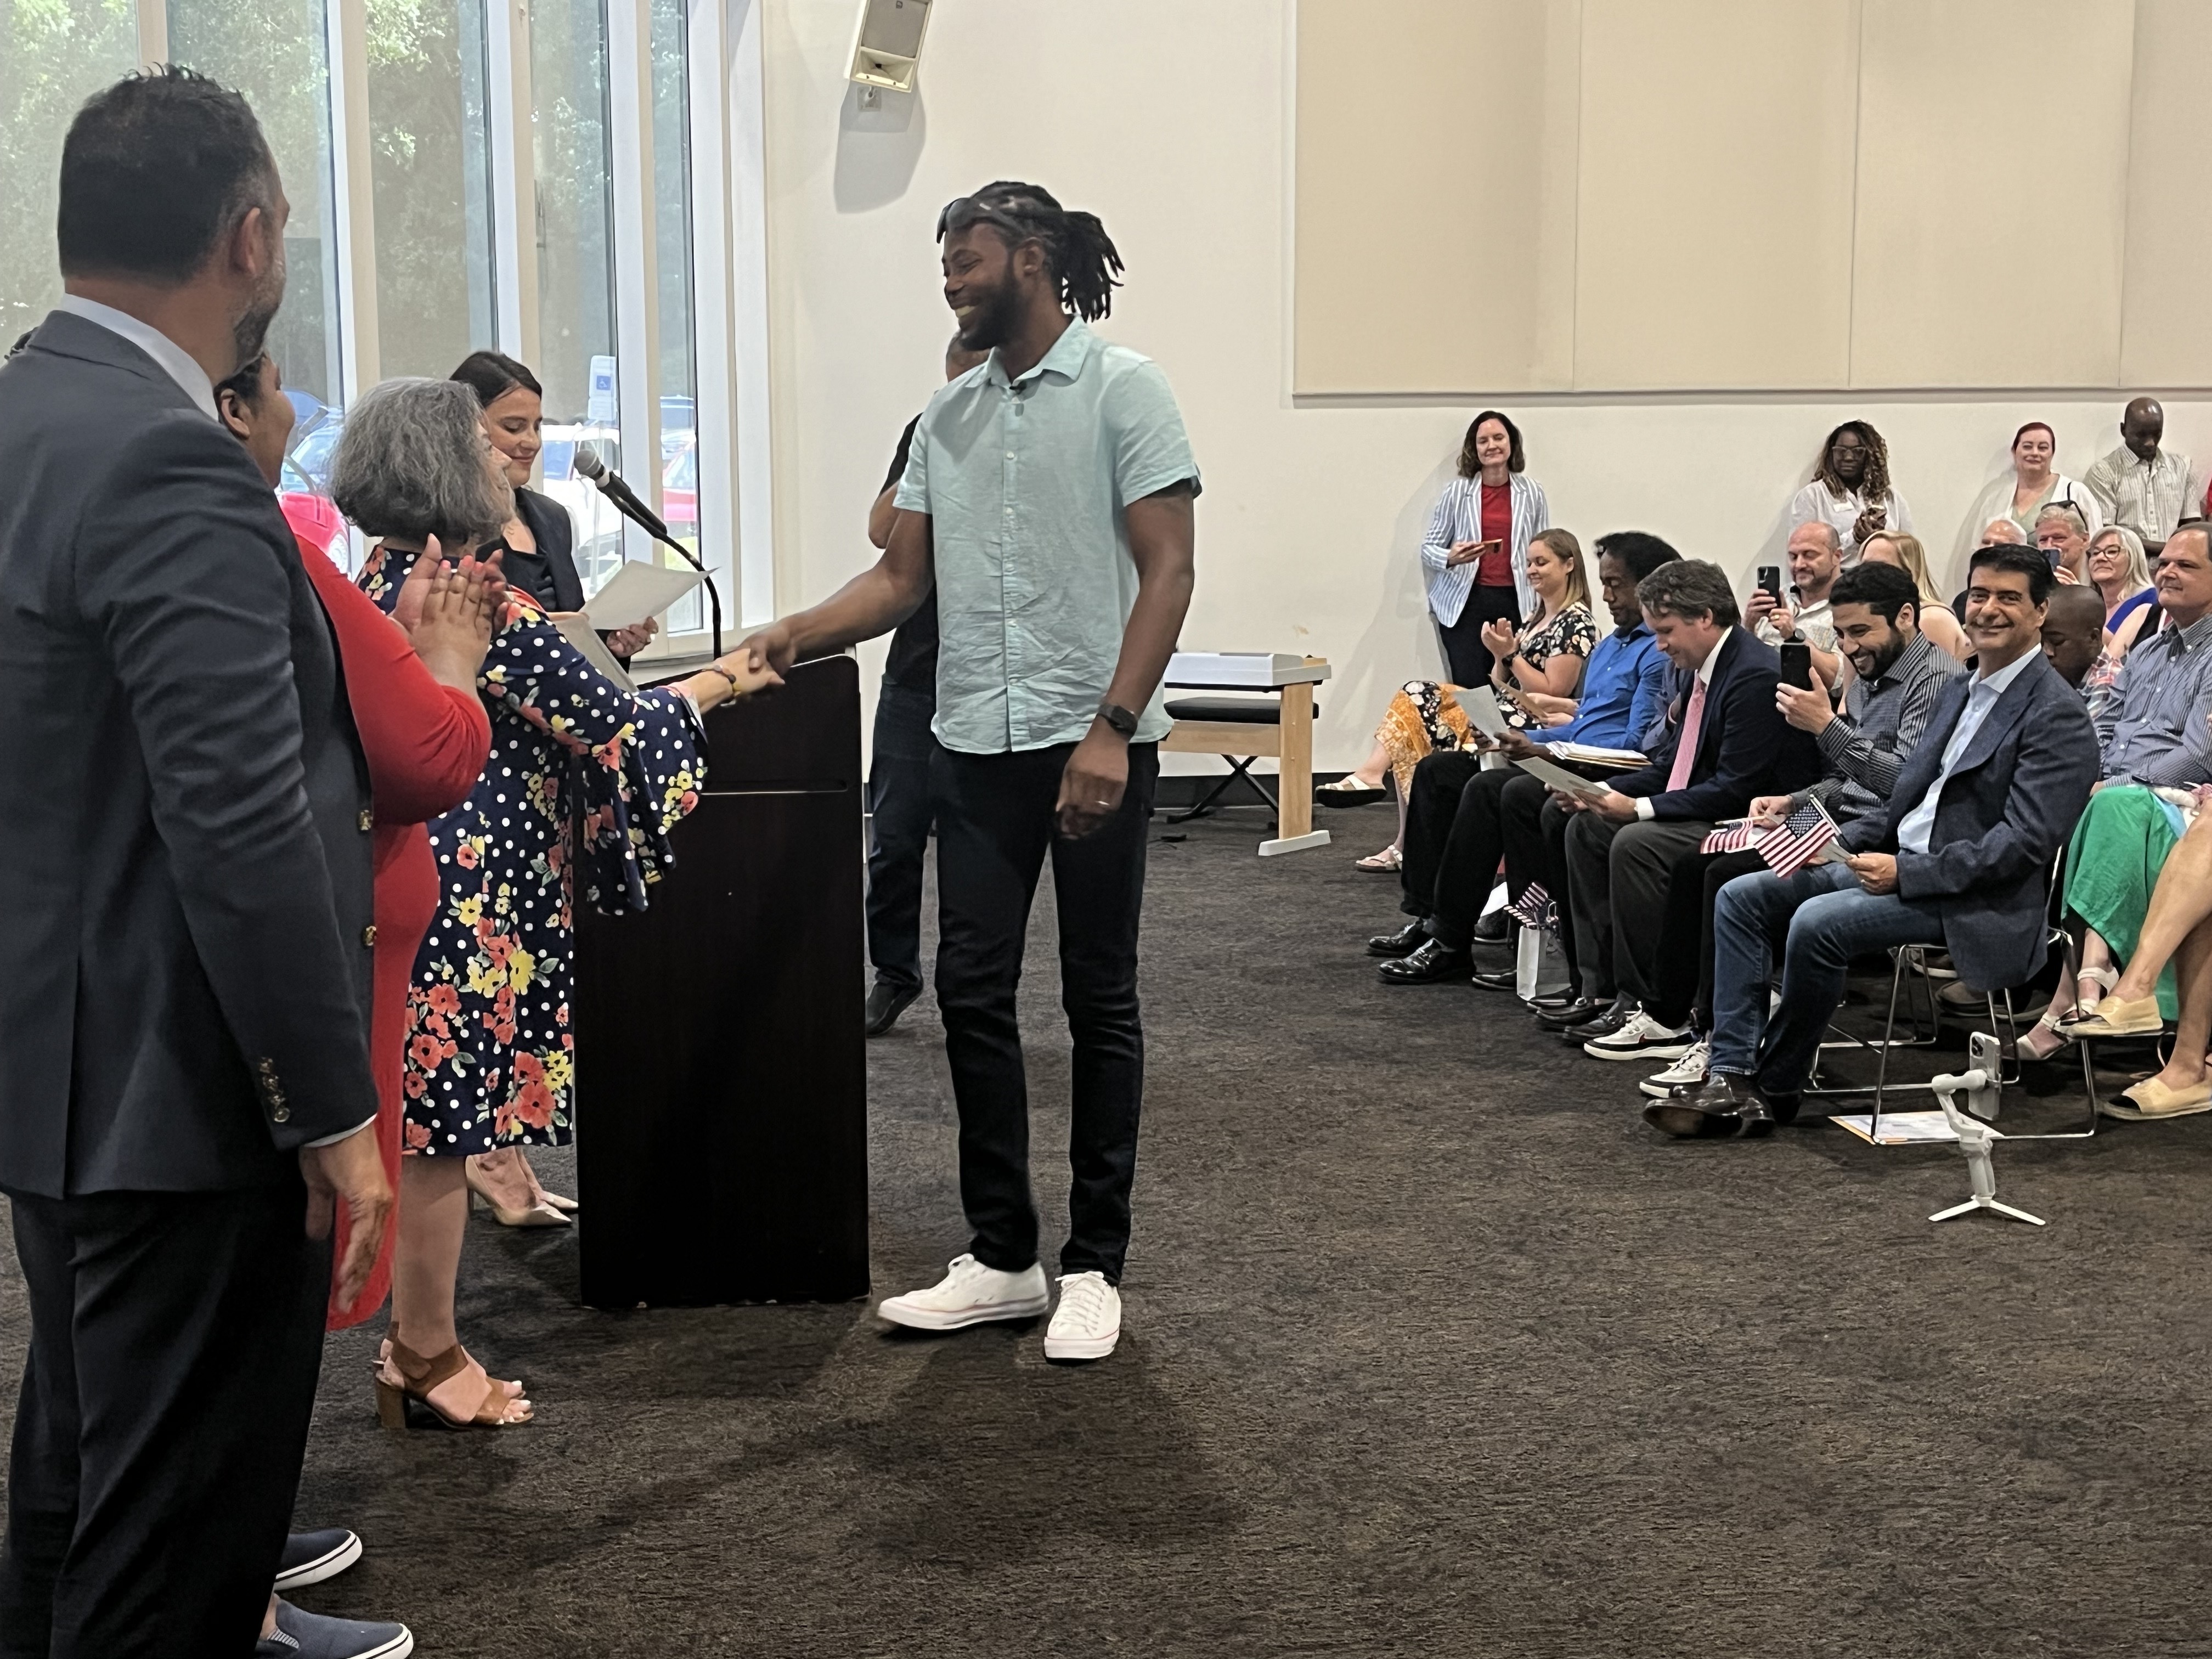 Davis Guzman receives his certificate as he became one of 17 new U.S citizens recognized at a naturalization ceremony at the Charlotte Museum of History.